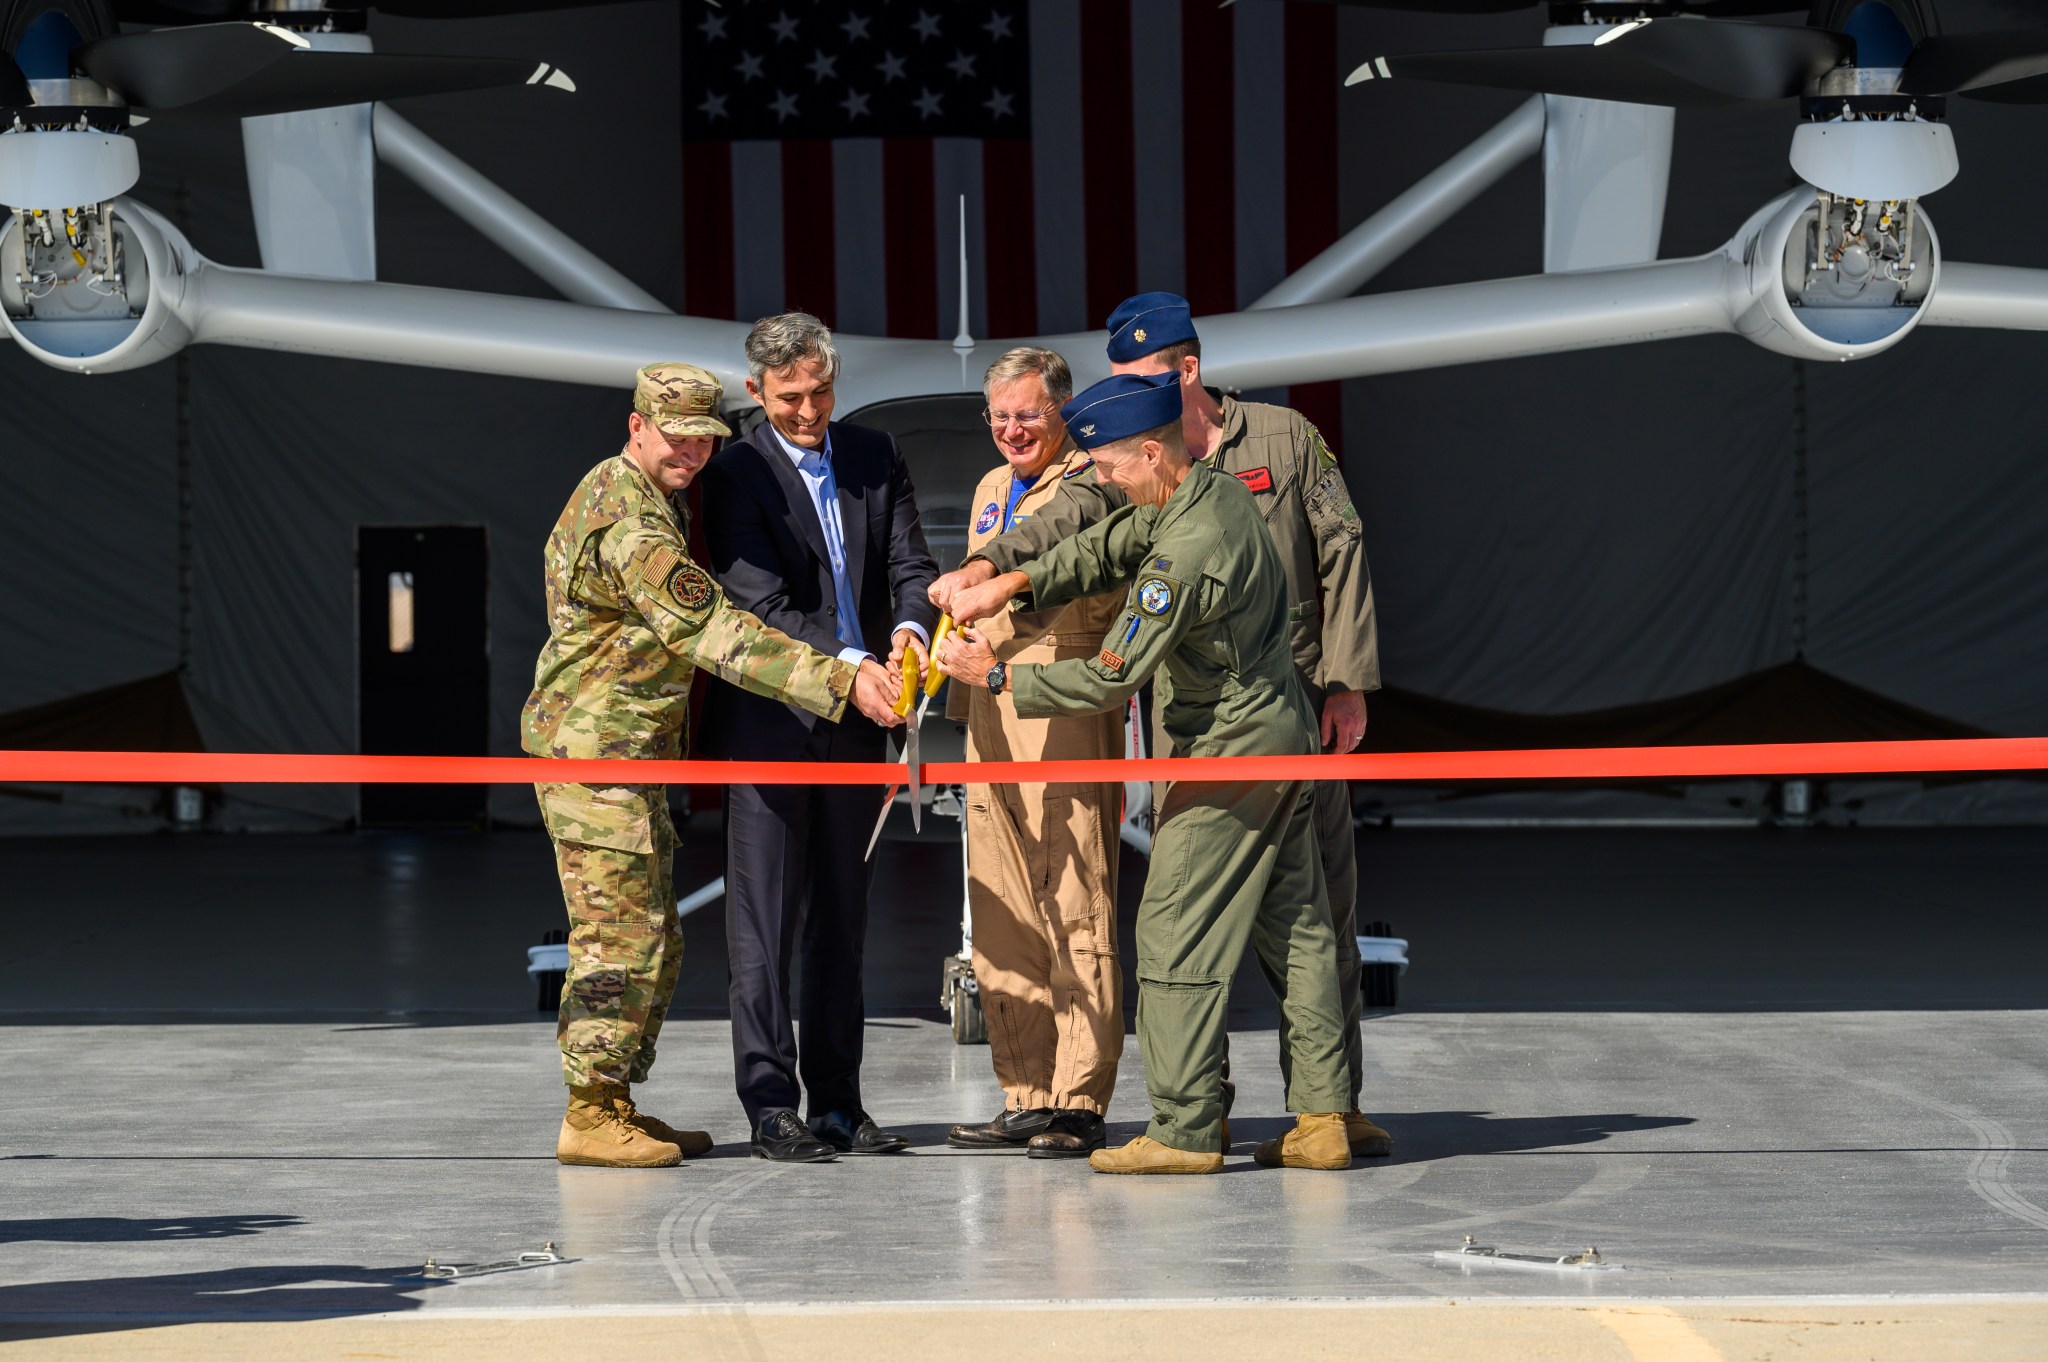 Members from the Air Force, Joby Aviation, and NASA cut a ribbon on Sept. 25 at Edwards Air Force Base in Edwards, California after opening a maintenance shelter for Joby's electric vertical takeoff and landing (eVTOL) aircraft.